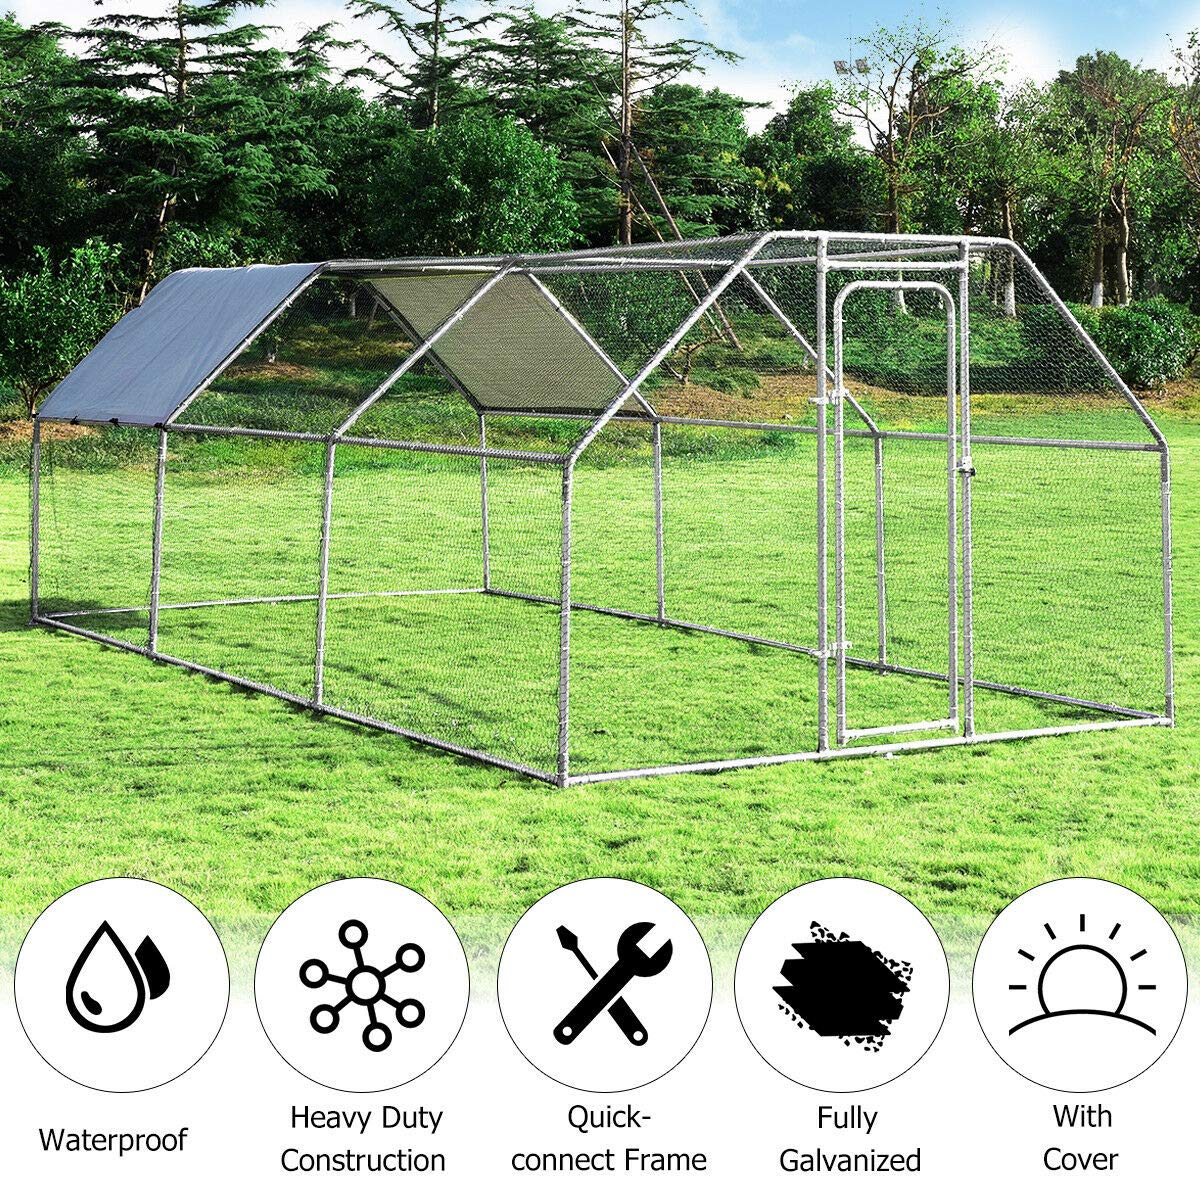 Giantex Large Metal Chicken Coop Walk-in Chicken Coops Hen Run House Shade Cage with Waterproof and Anti-Ultraviolet Cover for Outdoor Backyard